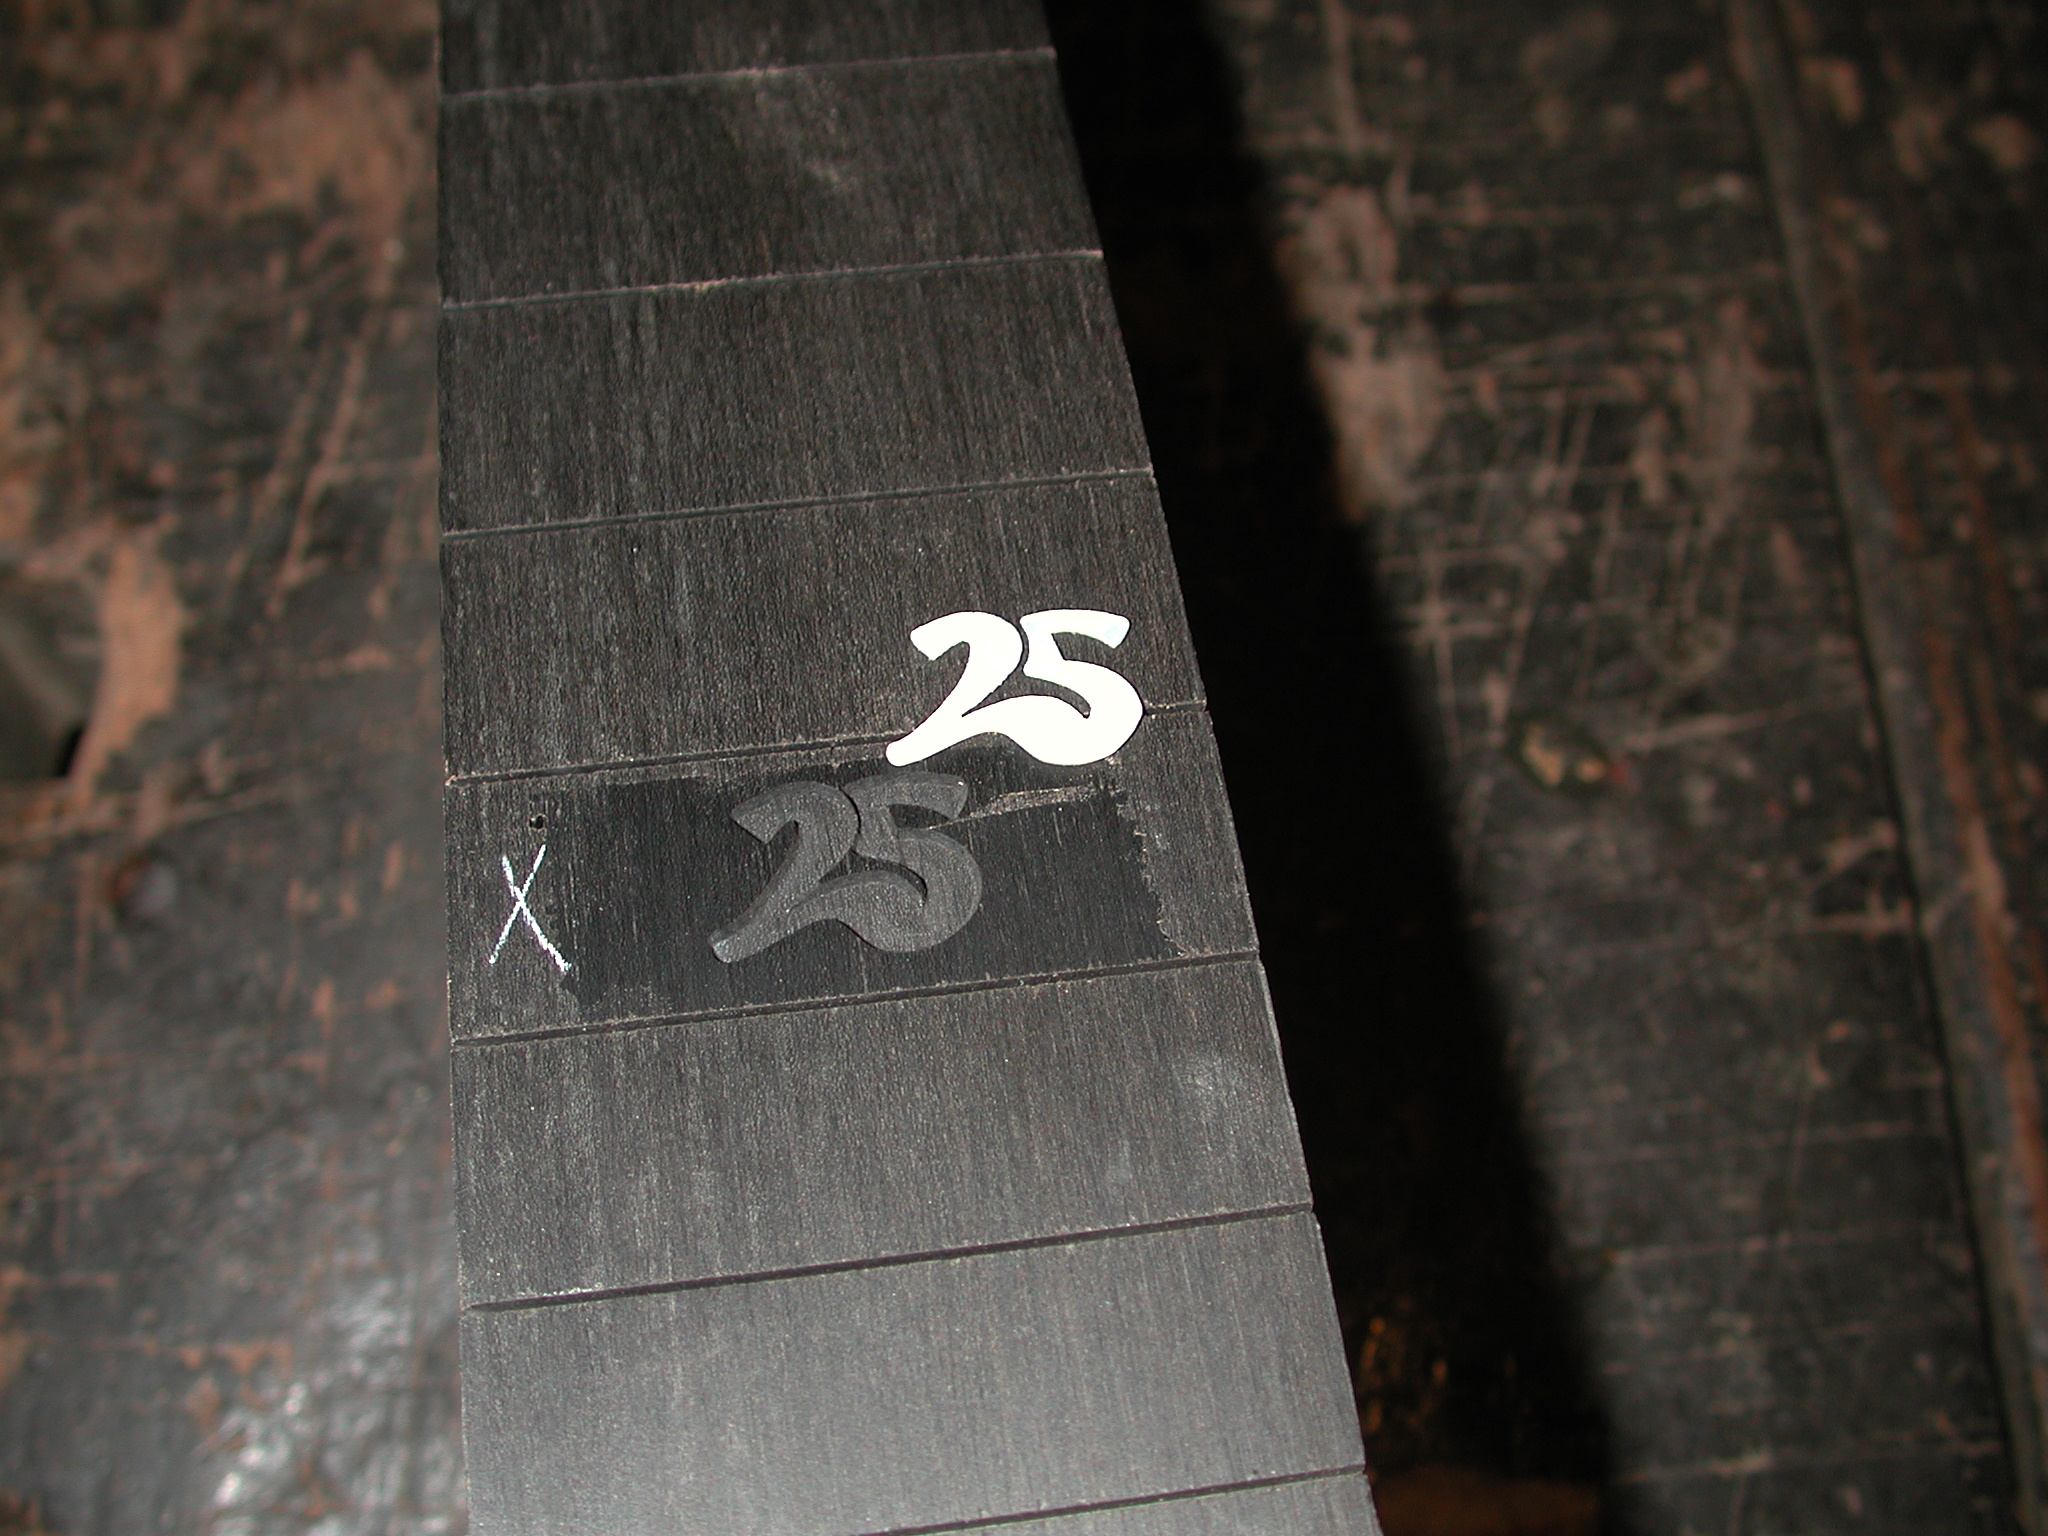 Fingerboard: The inlay "25" is fit into the cutout.